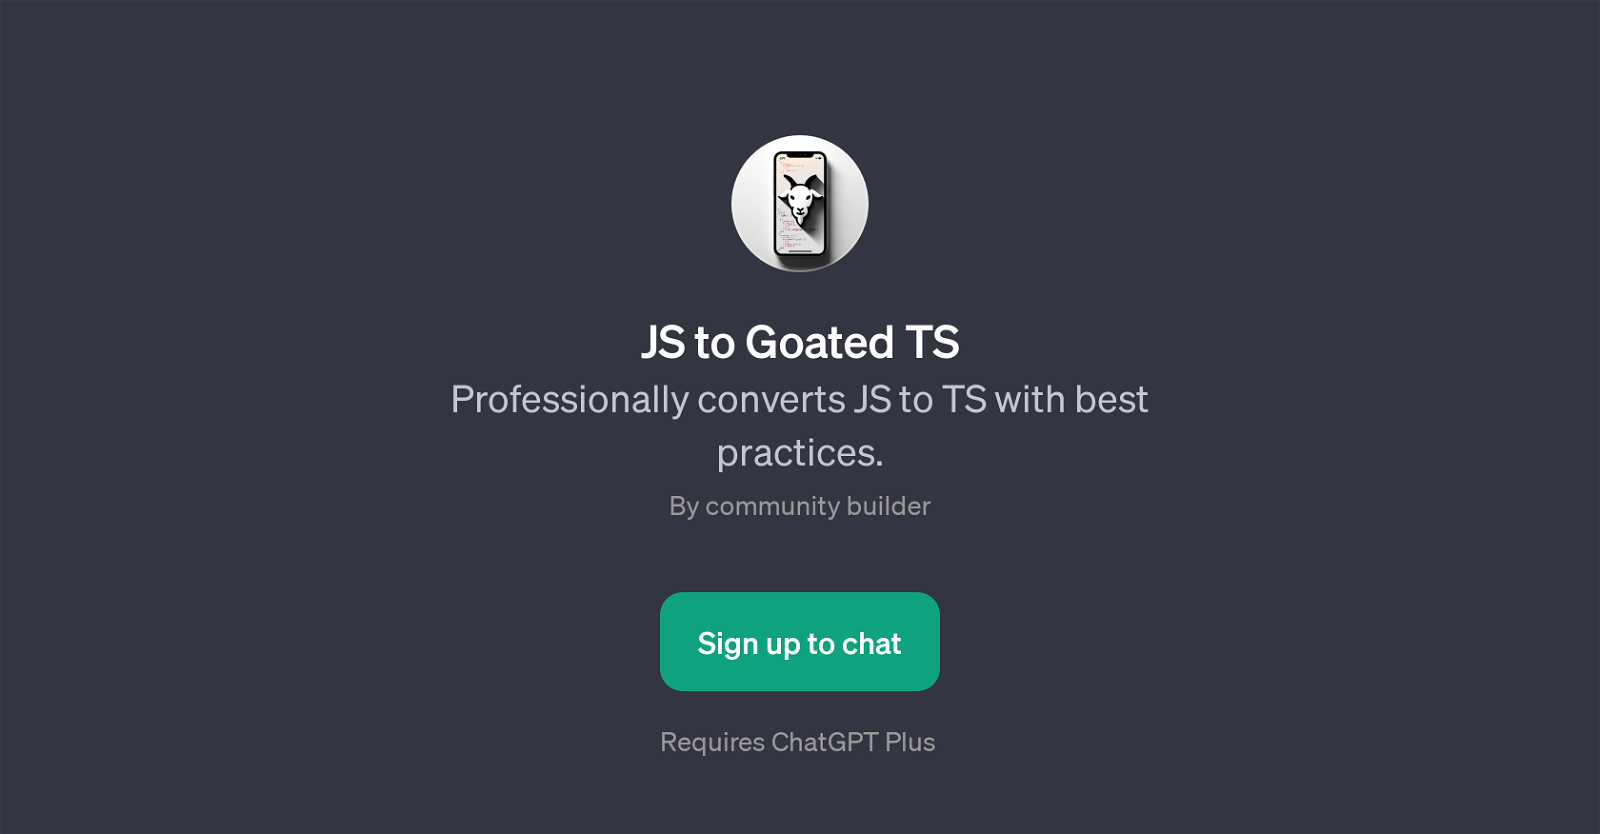 JS to Goated TS website